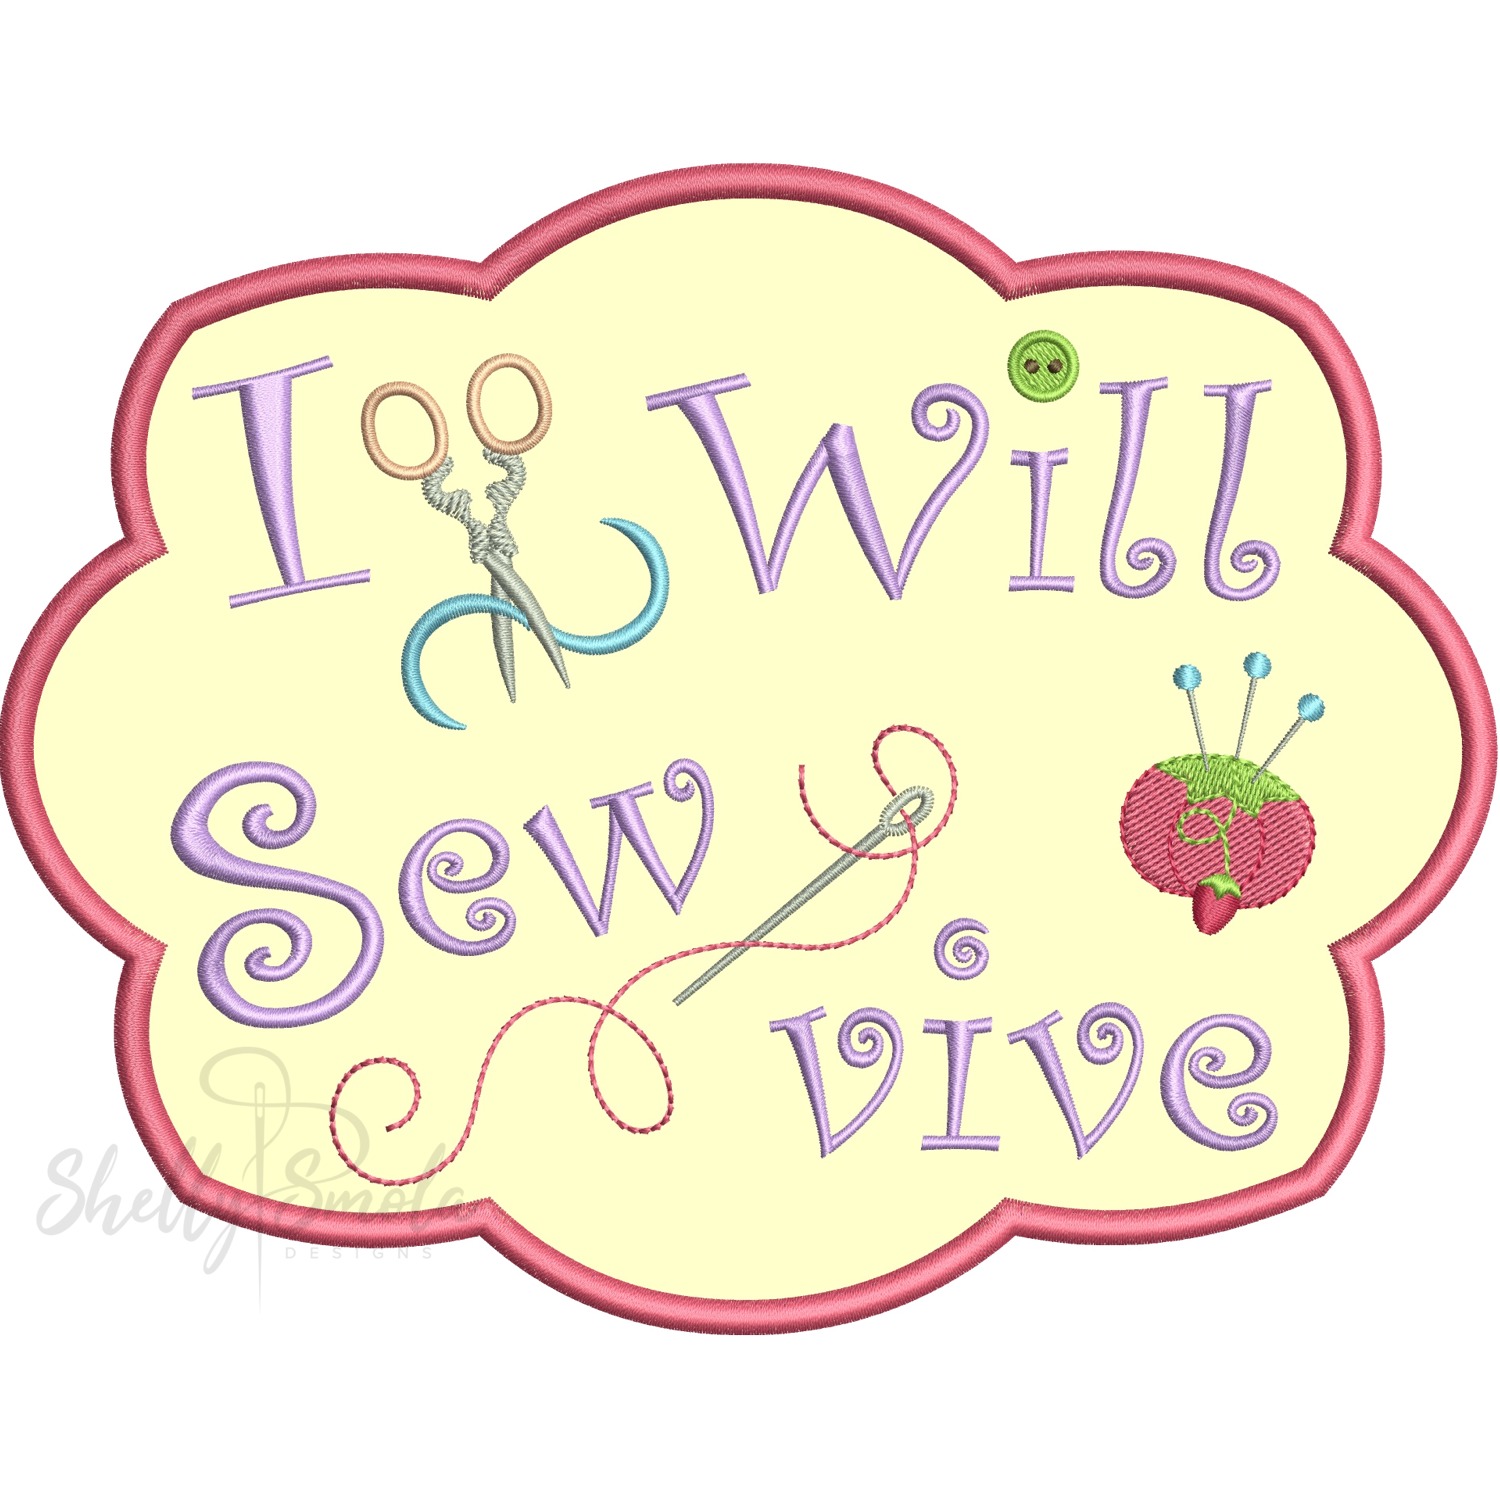 I Will SewVive by Shelly Smola